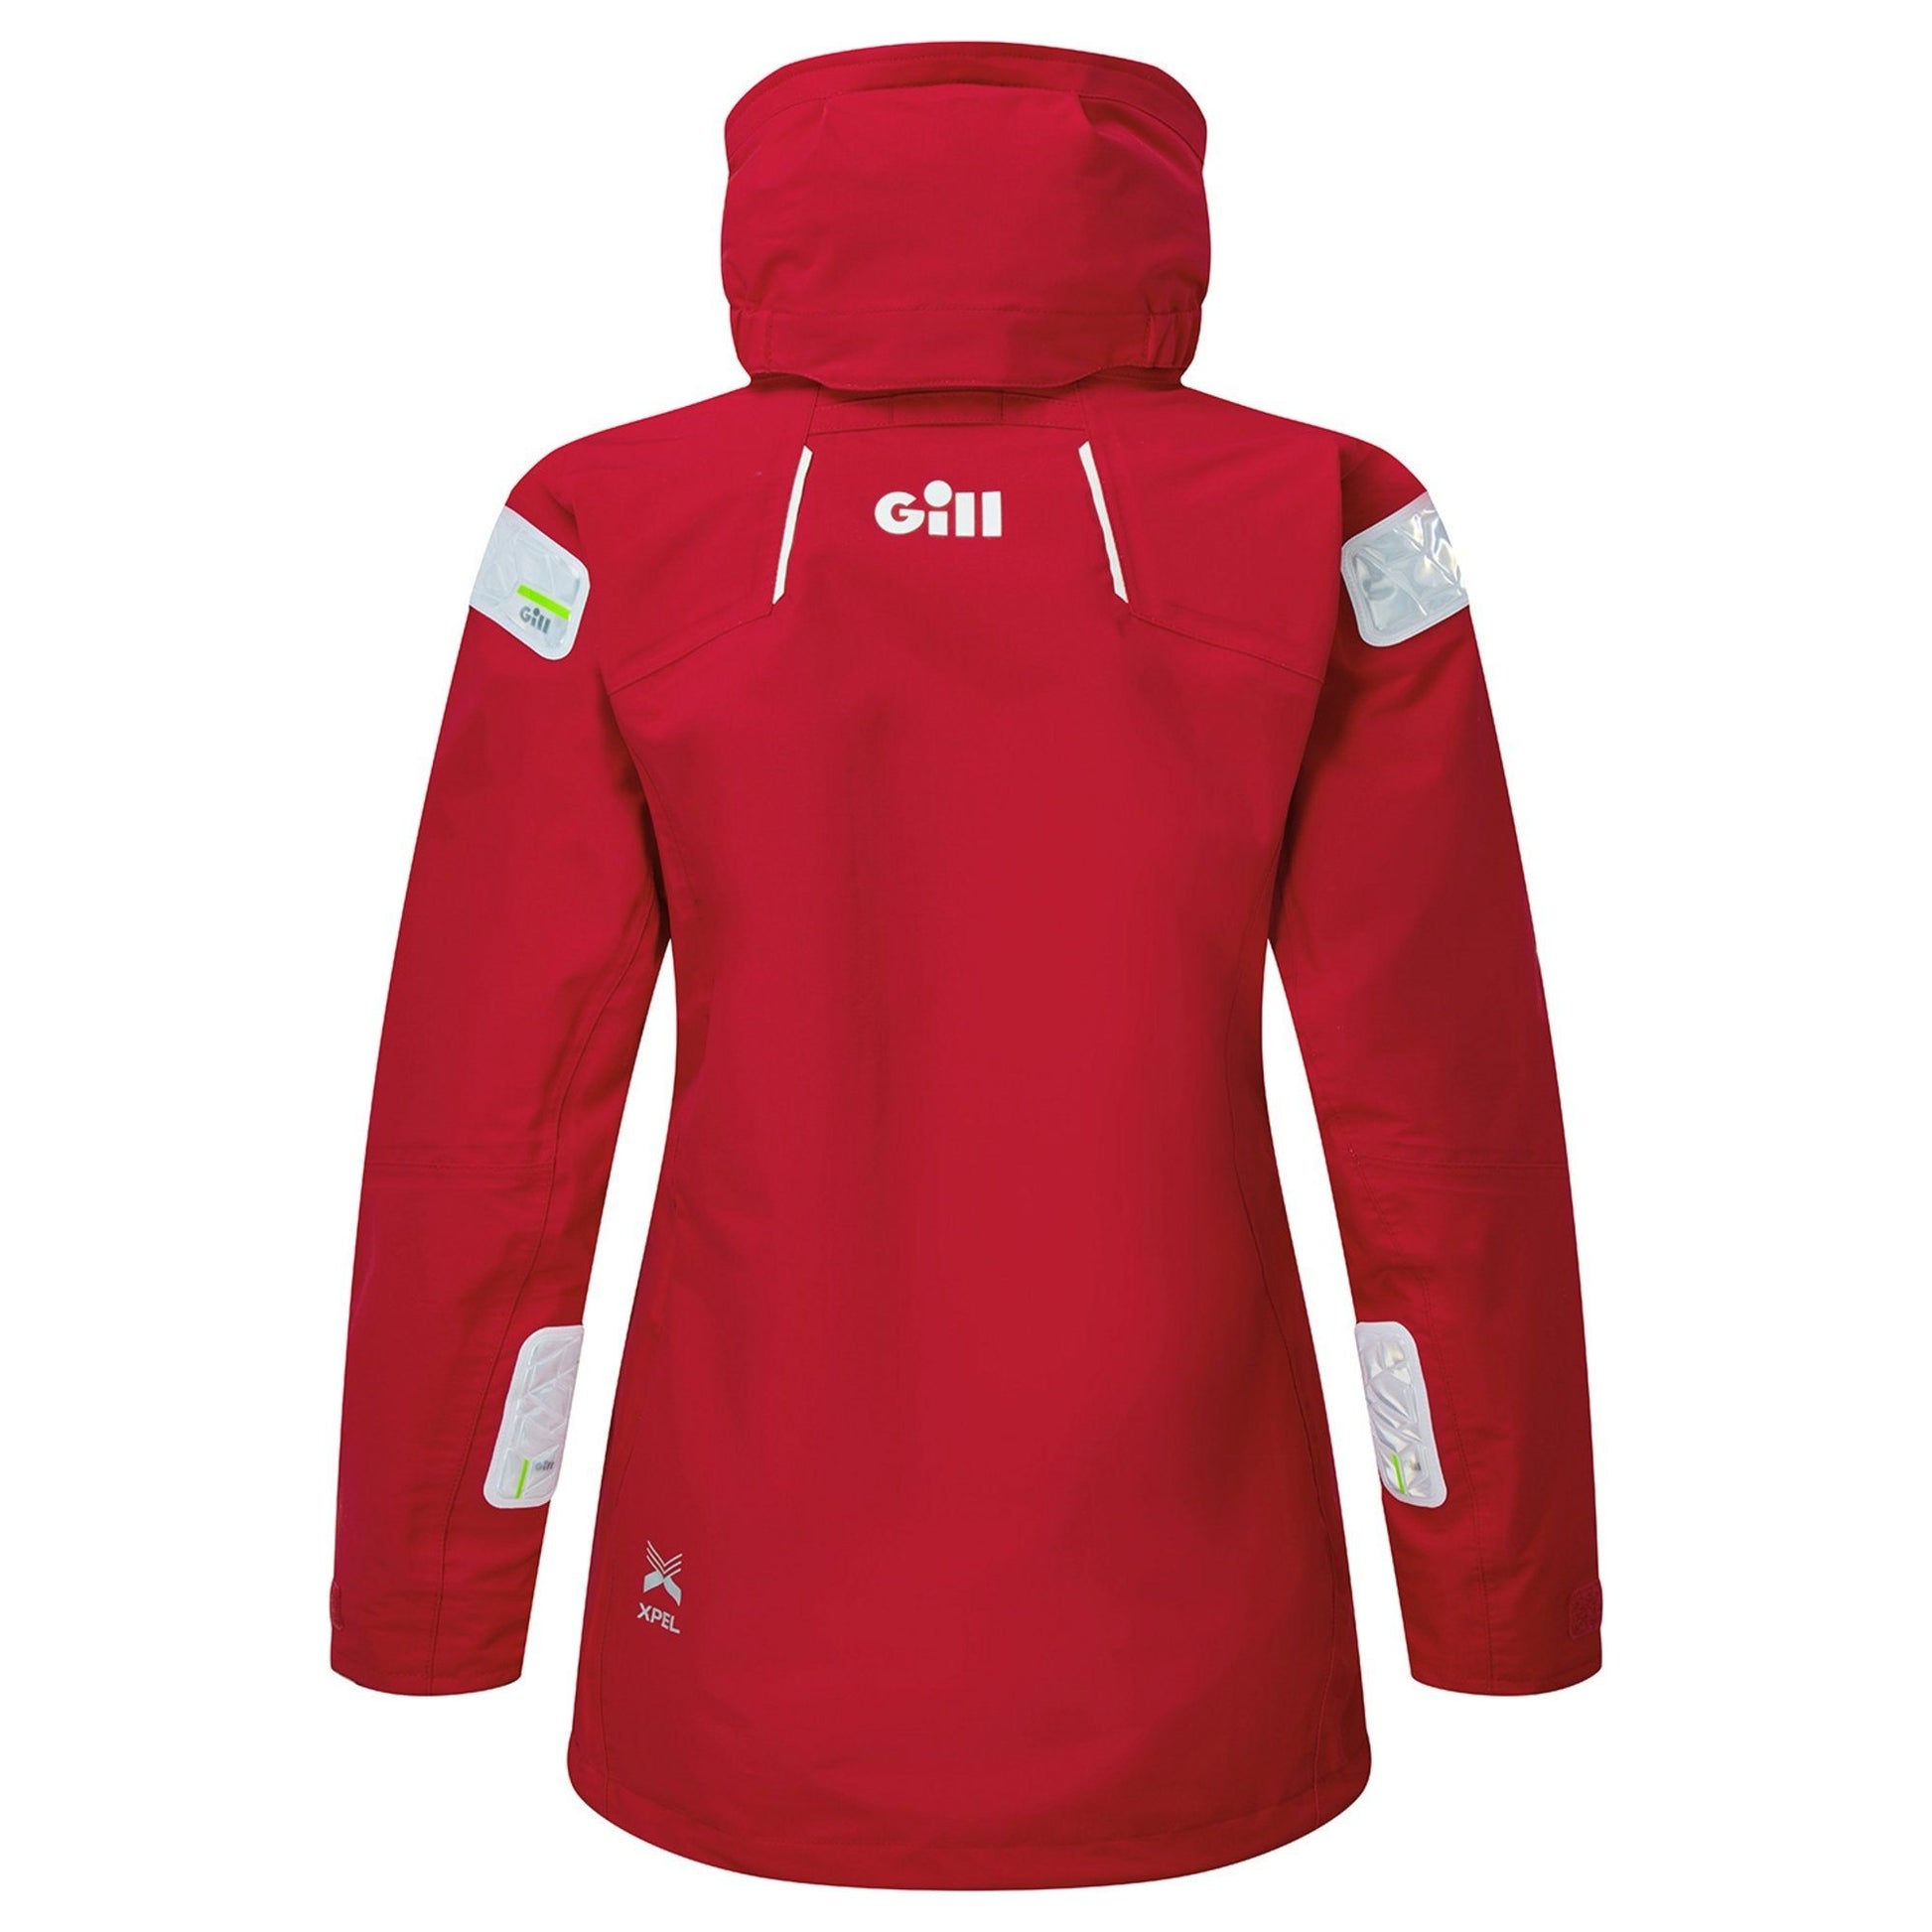 Gill Women's OS2 Offshore Jacket Red